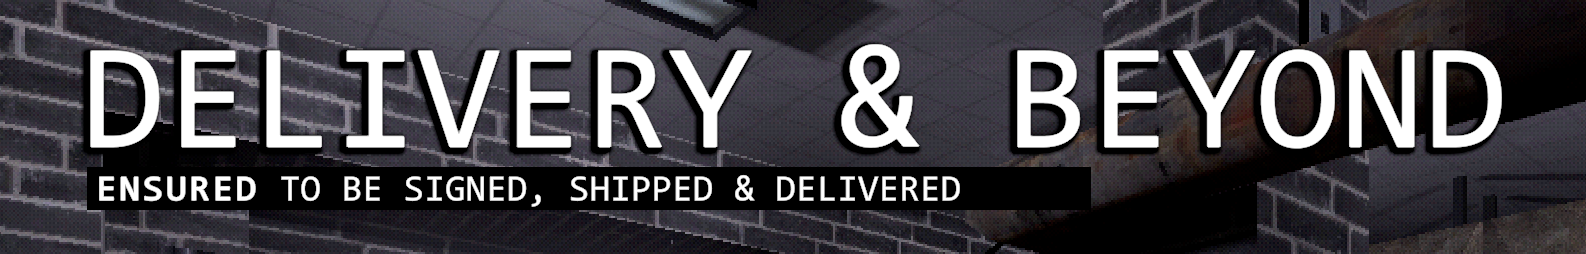 Delivery & Beyond